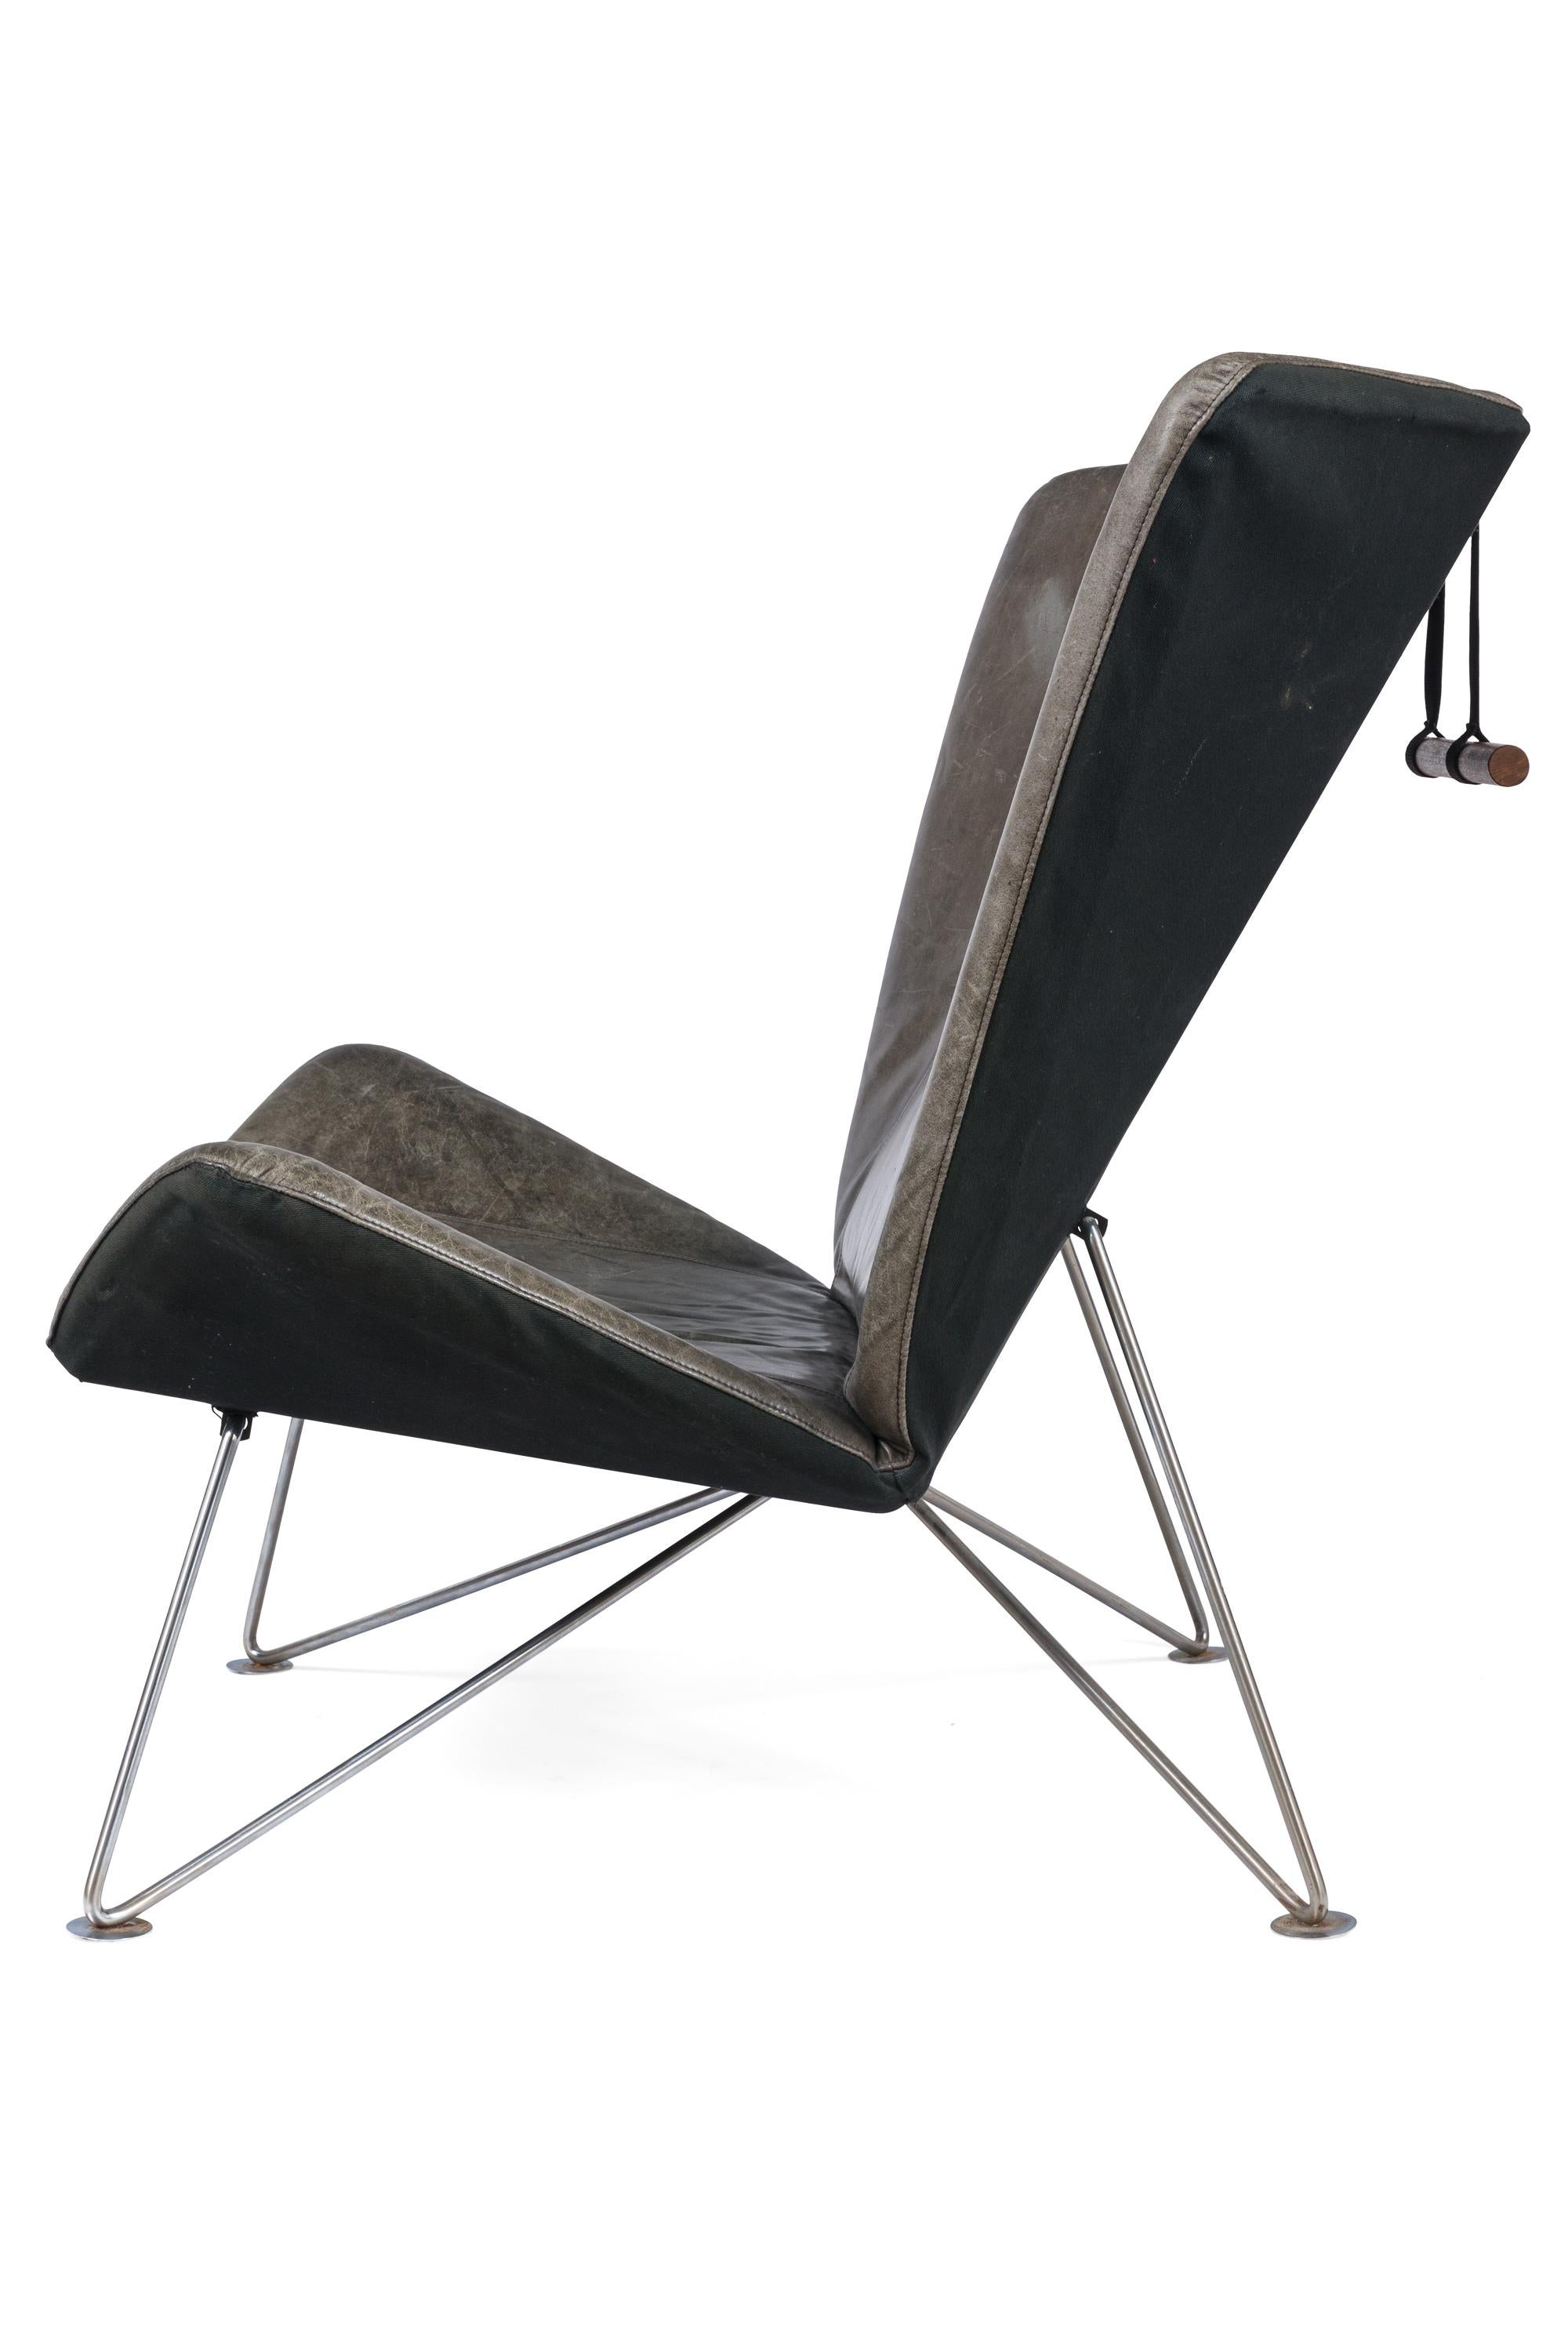 Stainless Steel Scandinavian Modern Brown Leather Lounge Chairs, Sweden, 1970s